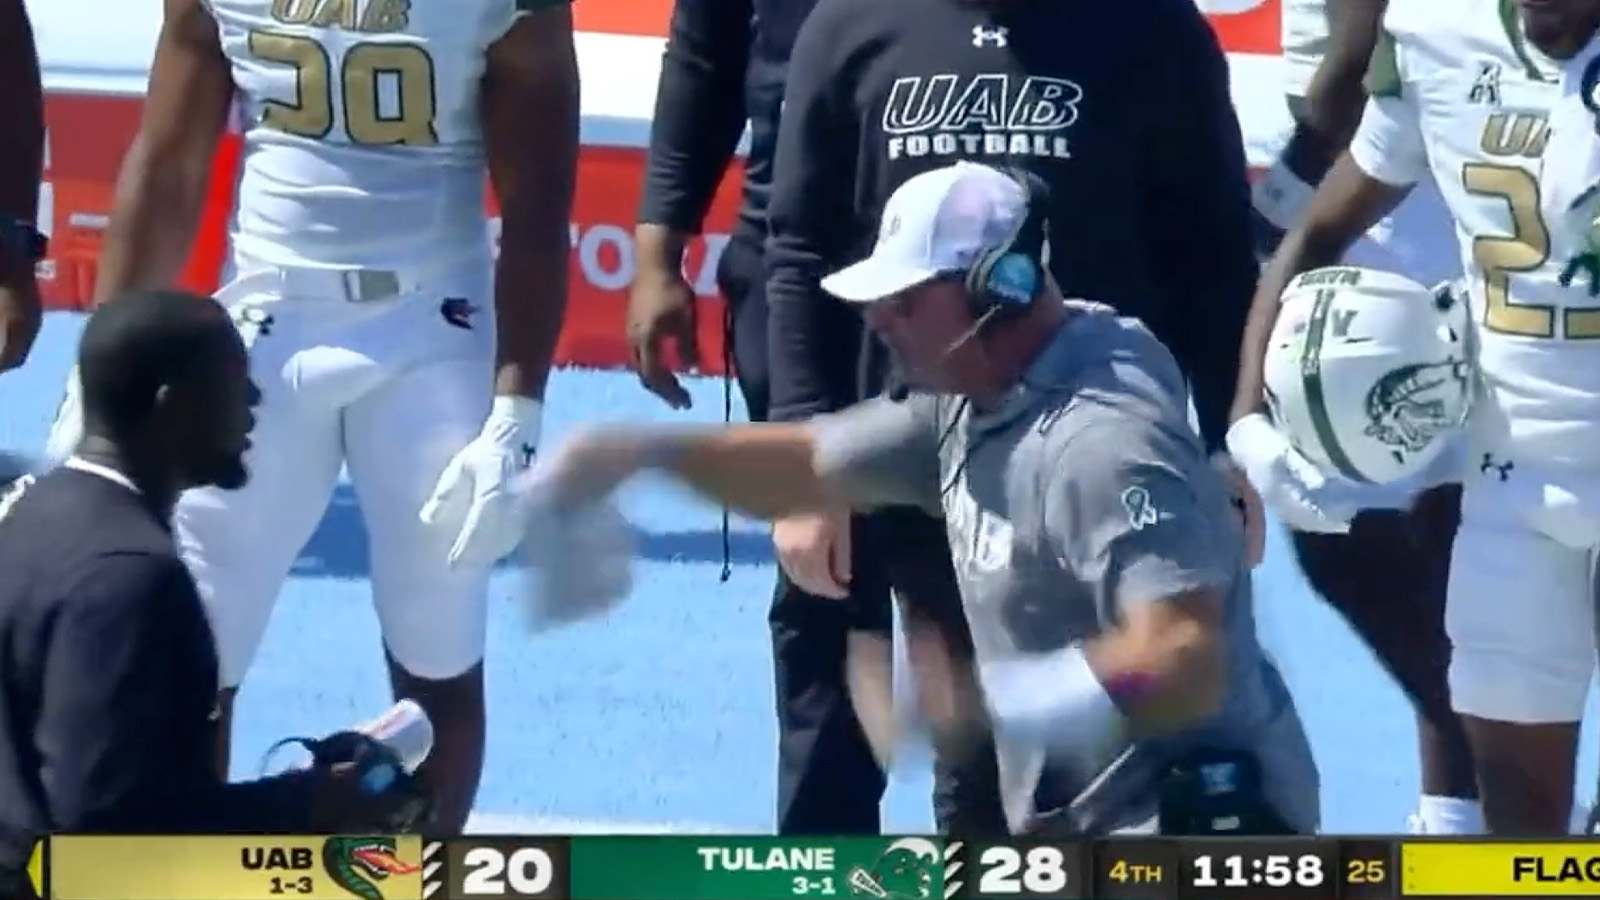 Trent Dilfer LOSES HIS MIND On UAB Coach During Angry Tirade